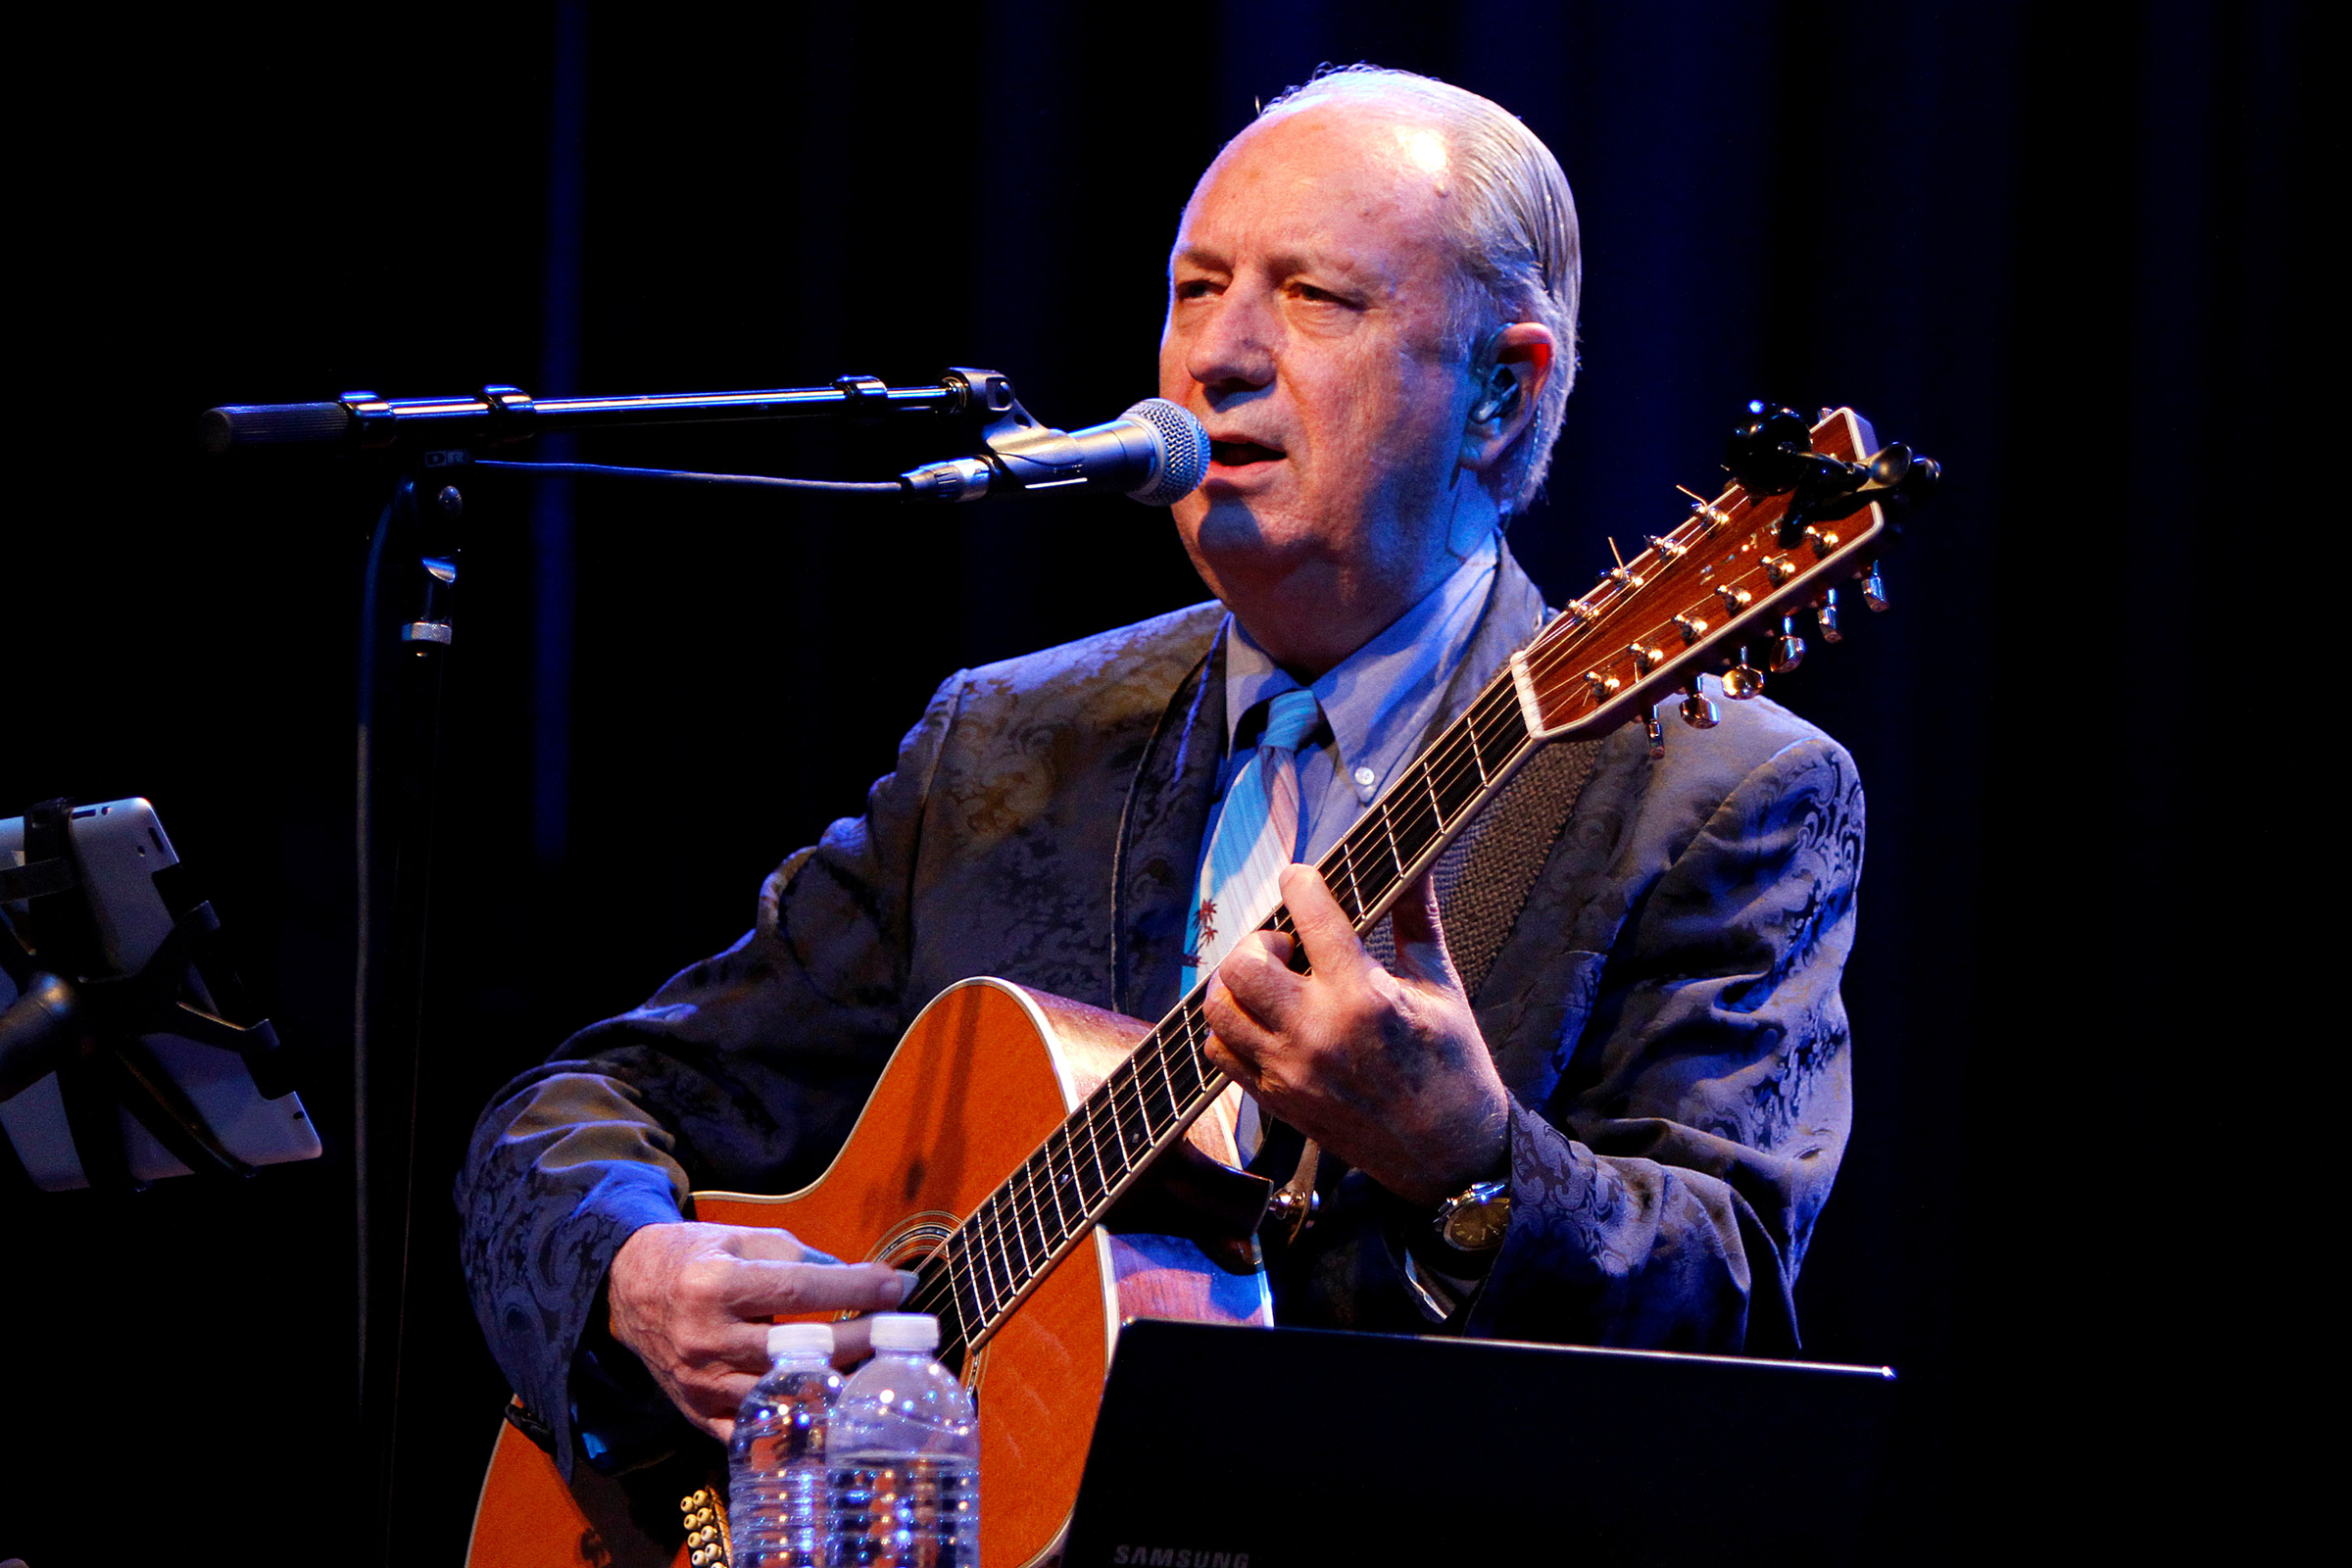 Michael Nesmith on 2020 Monkees Tour, New Live LP, Peter Tork Rolling